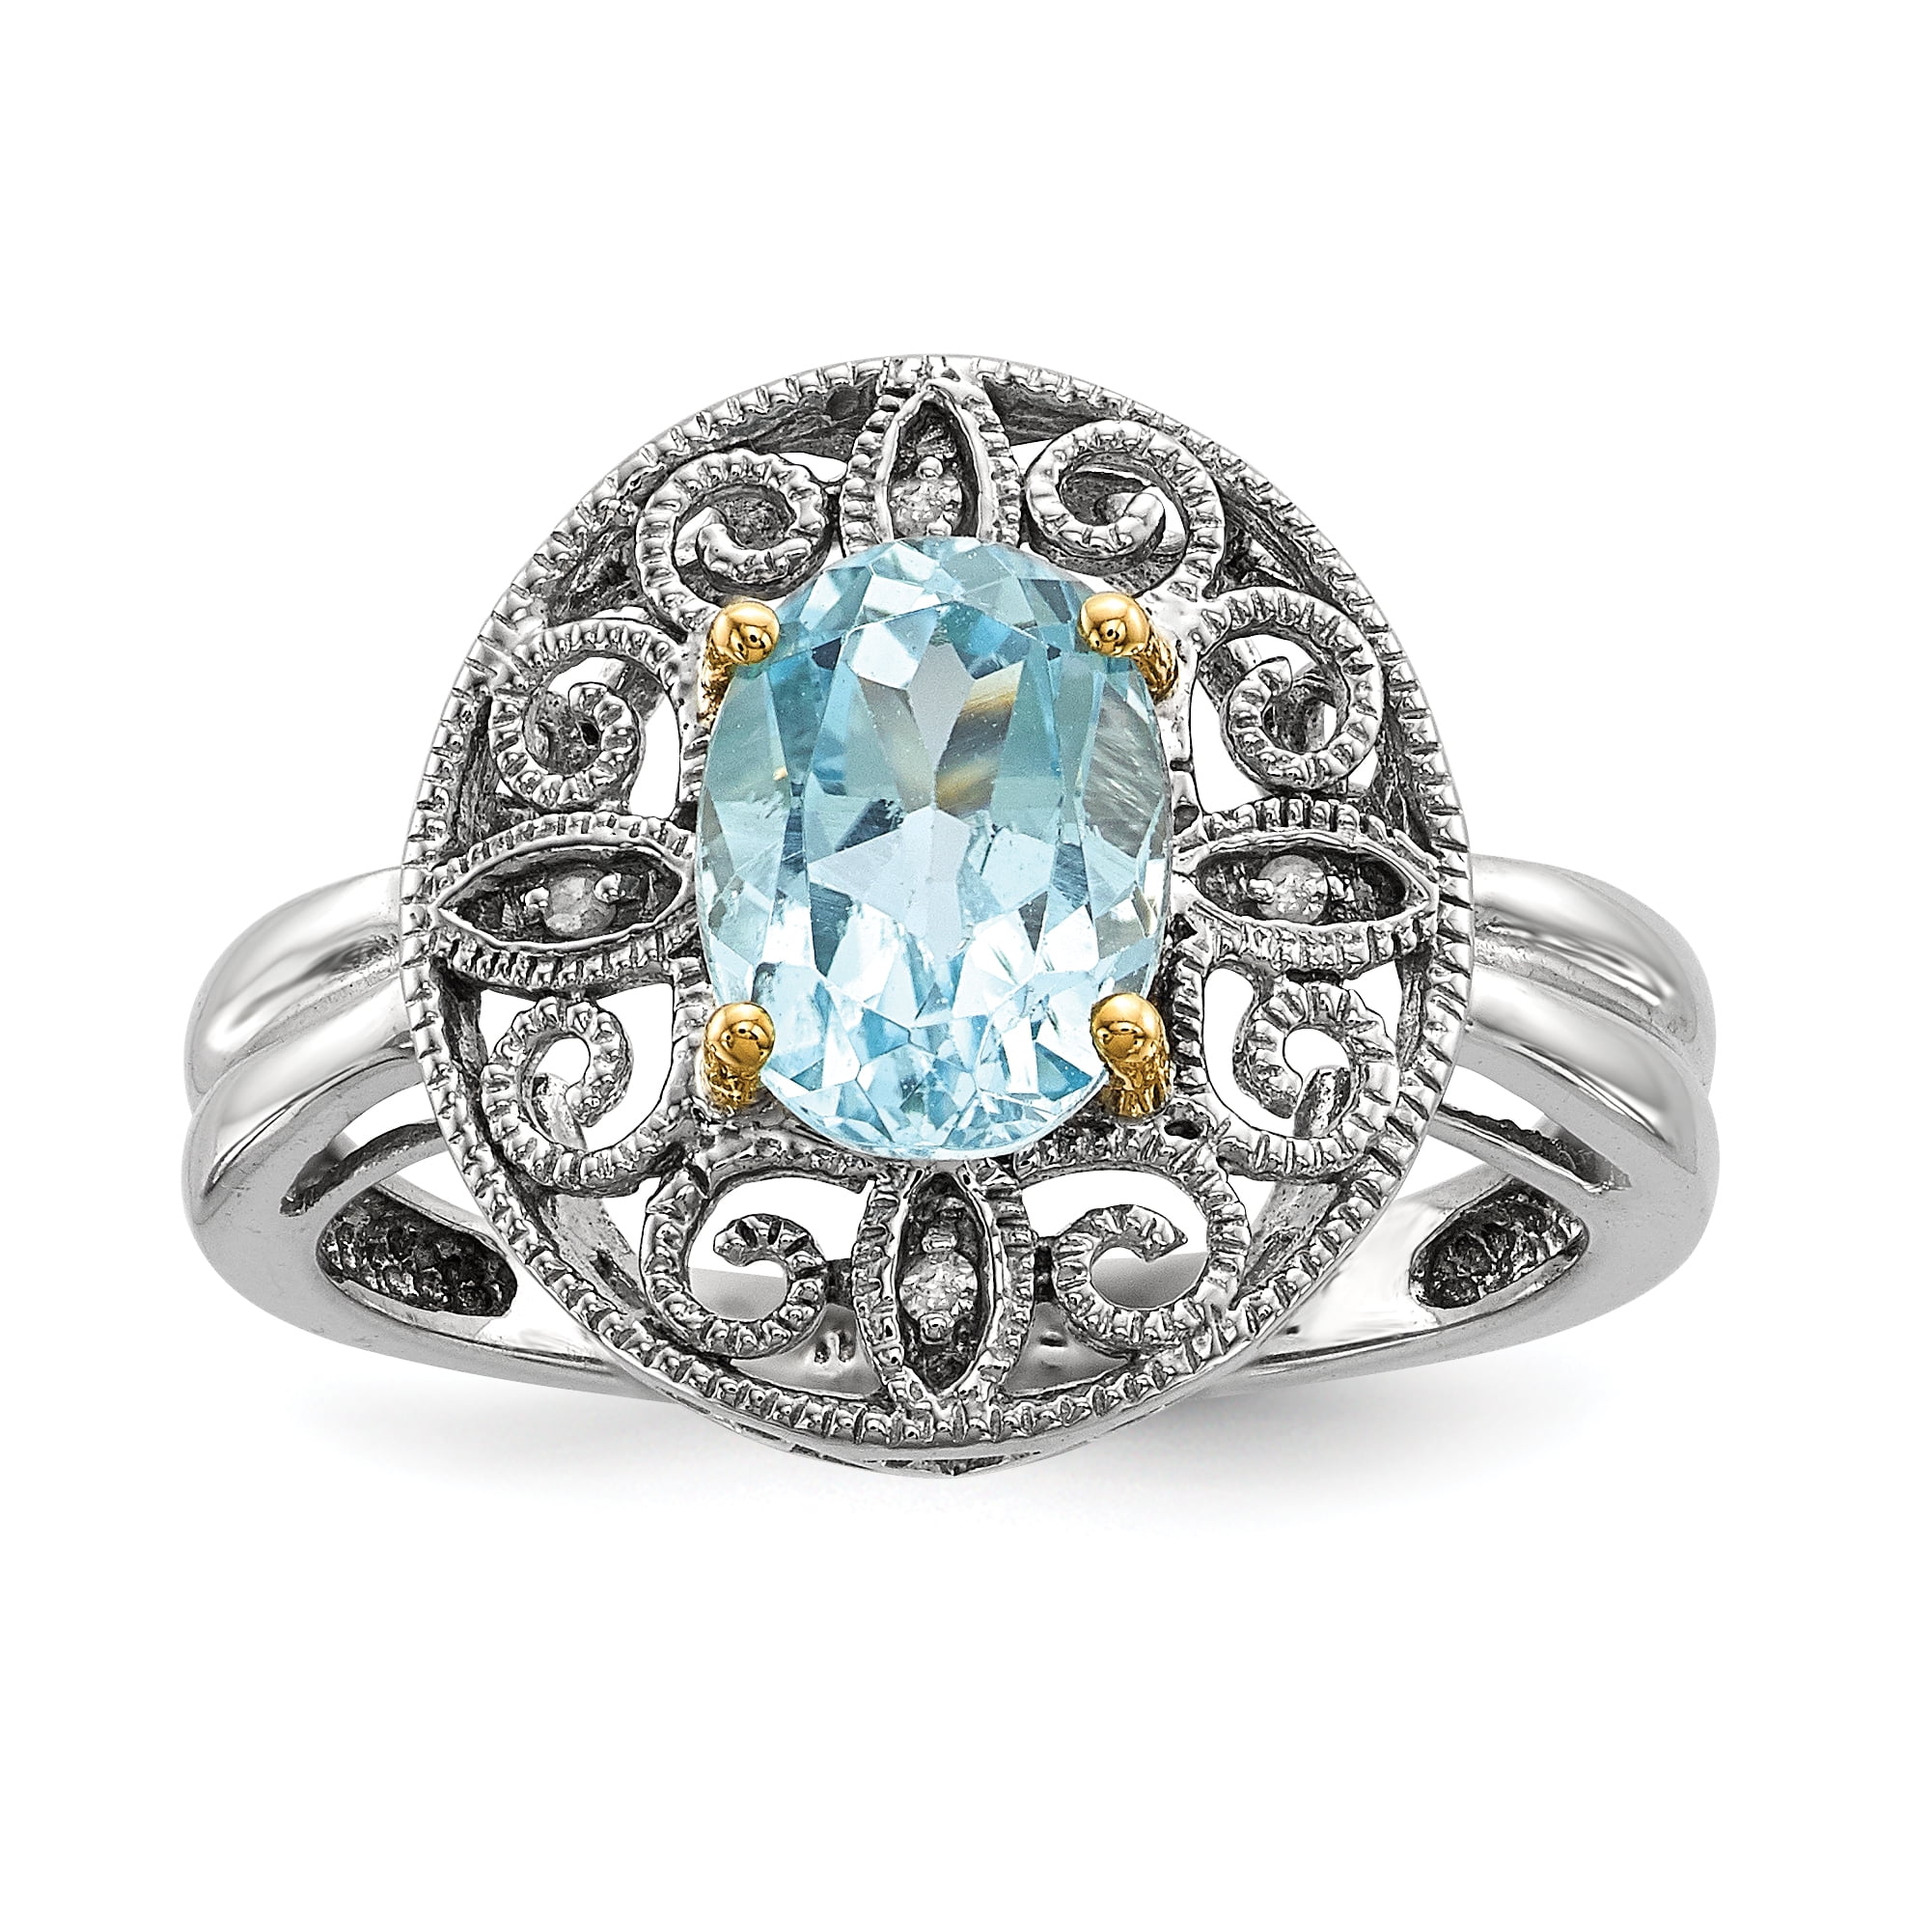 Sterling Silver 4 MM 925 and Gold-tone Accents Sky Blue Topaz and Diamond Ring